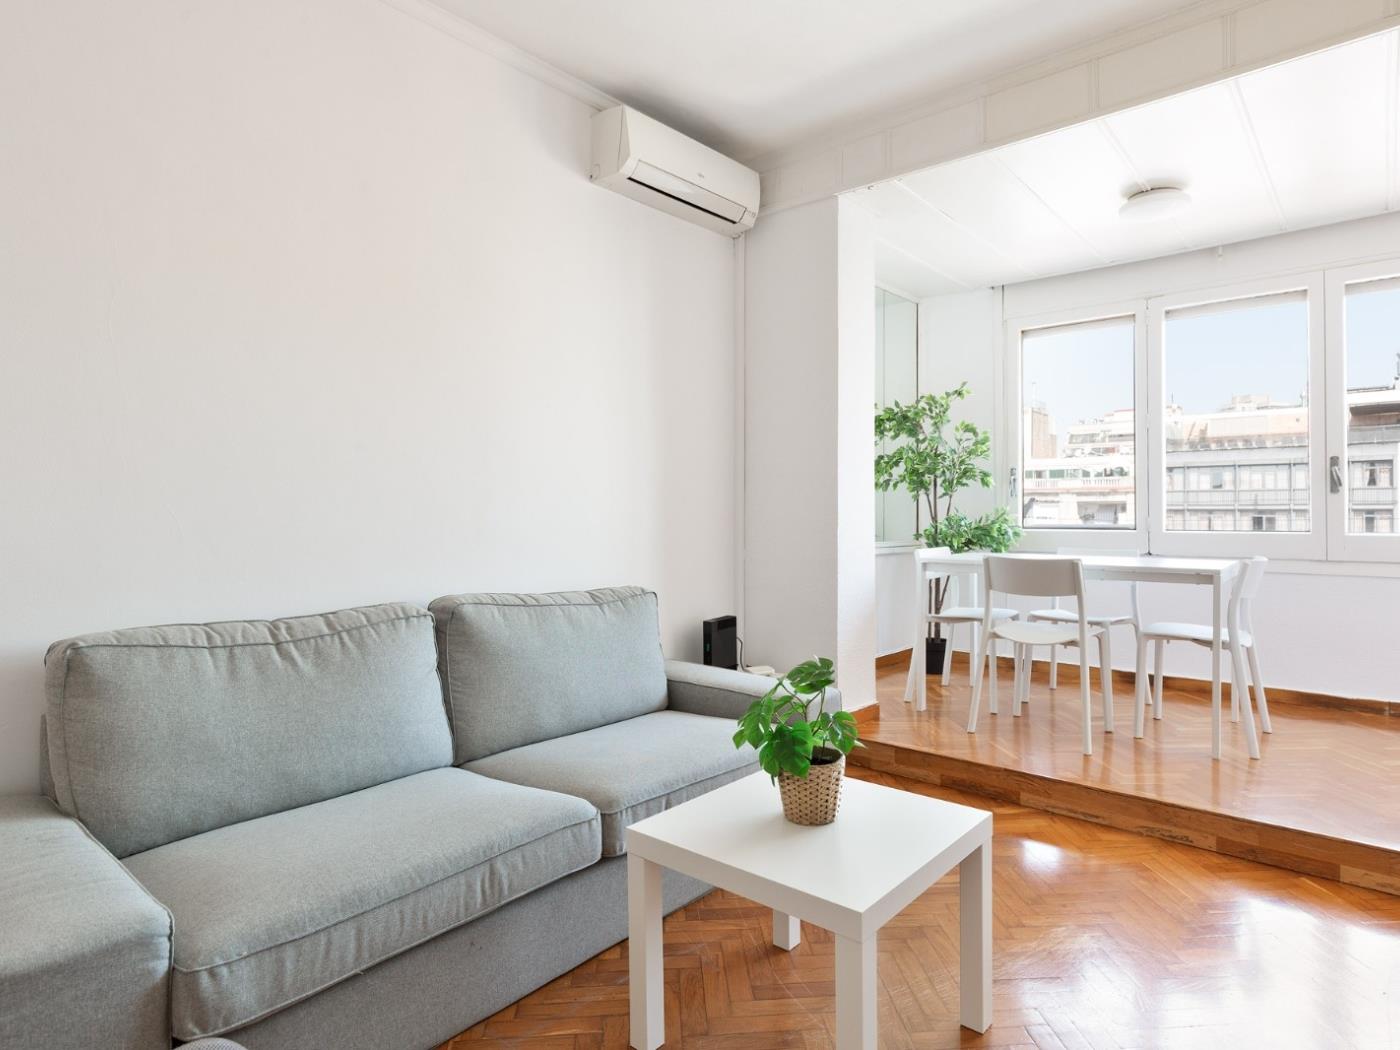 Apartment for 4 People on Calle Sepulveda - My Space Barcelona Apartments